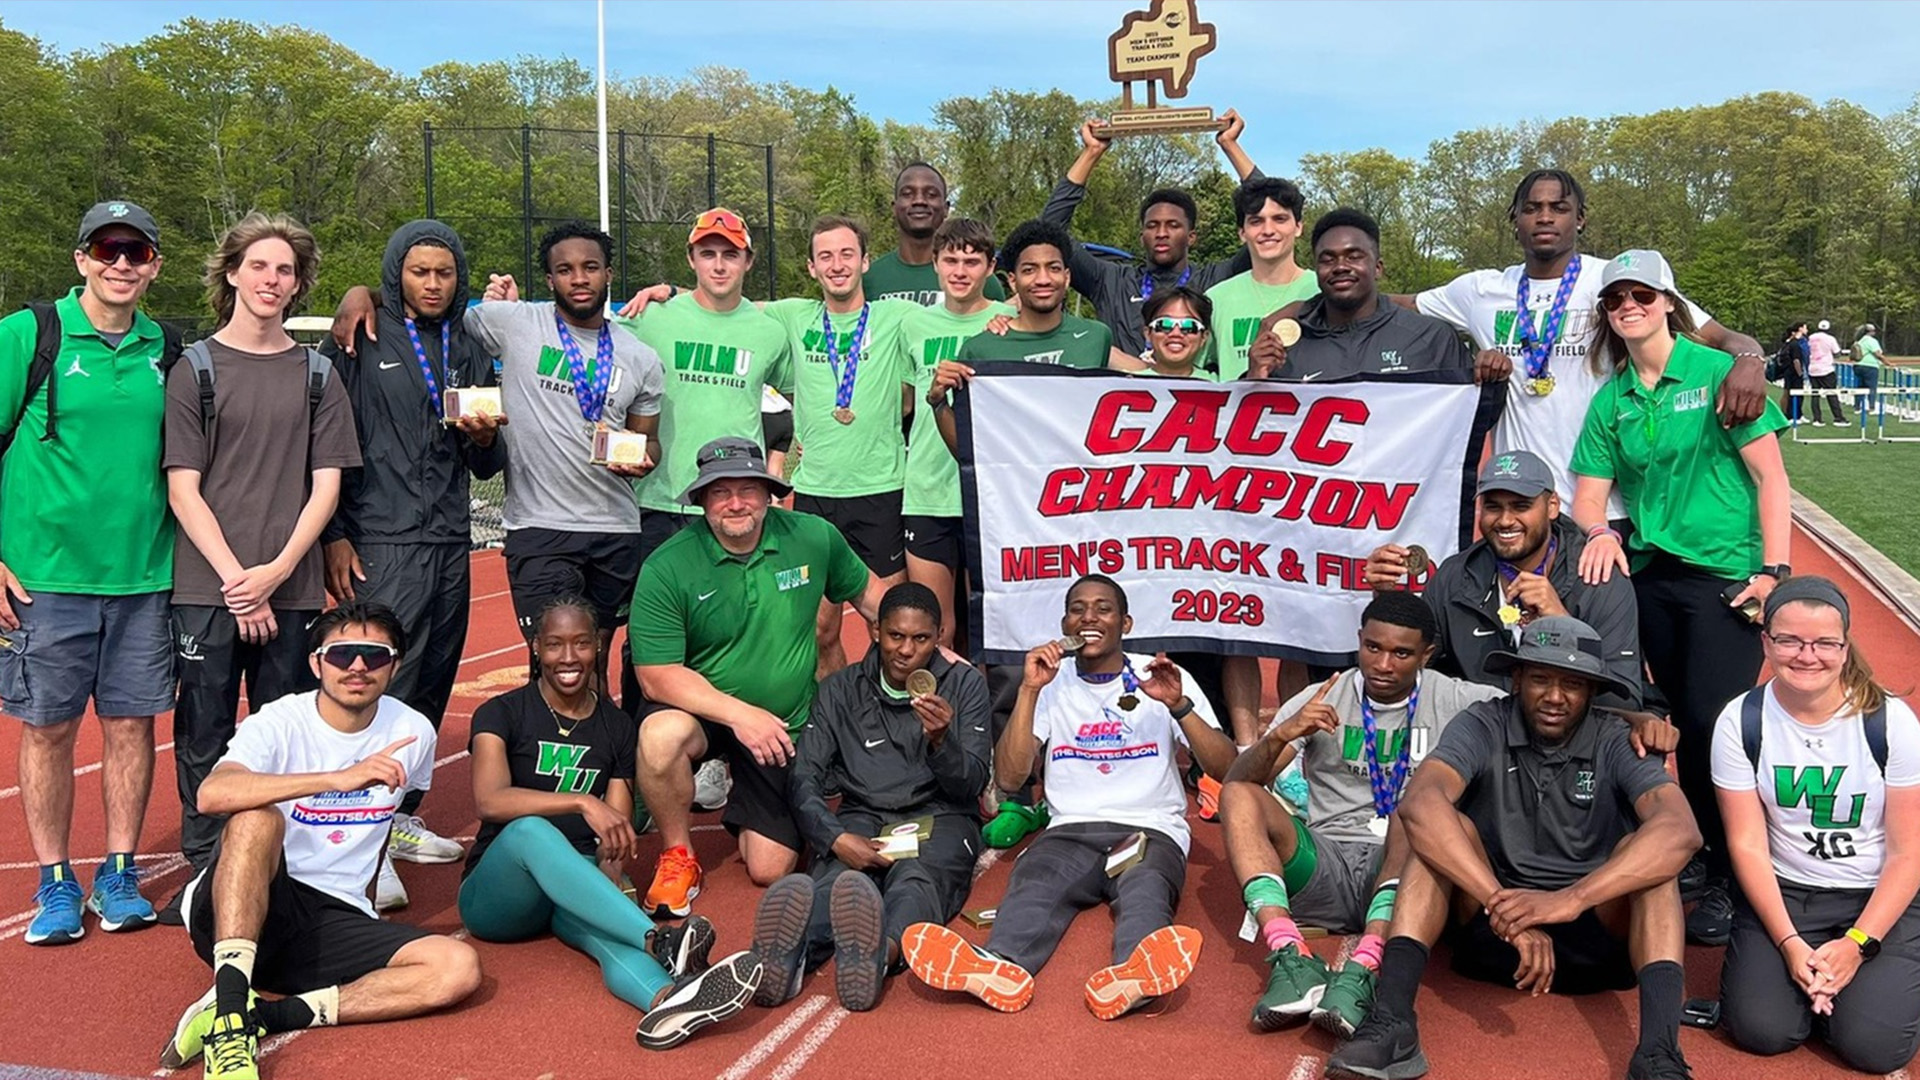 WilmU Claims First CACC Title in Men's Track & Field Program History